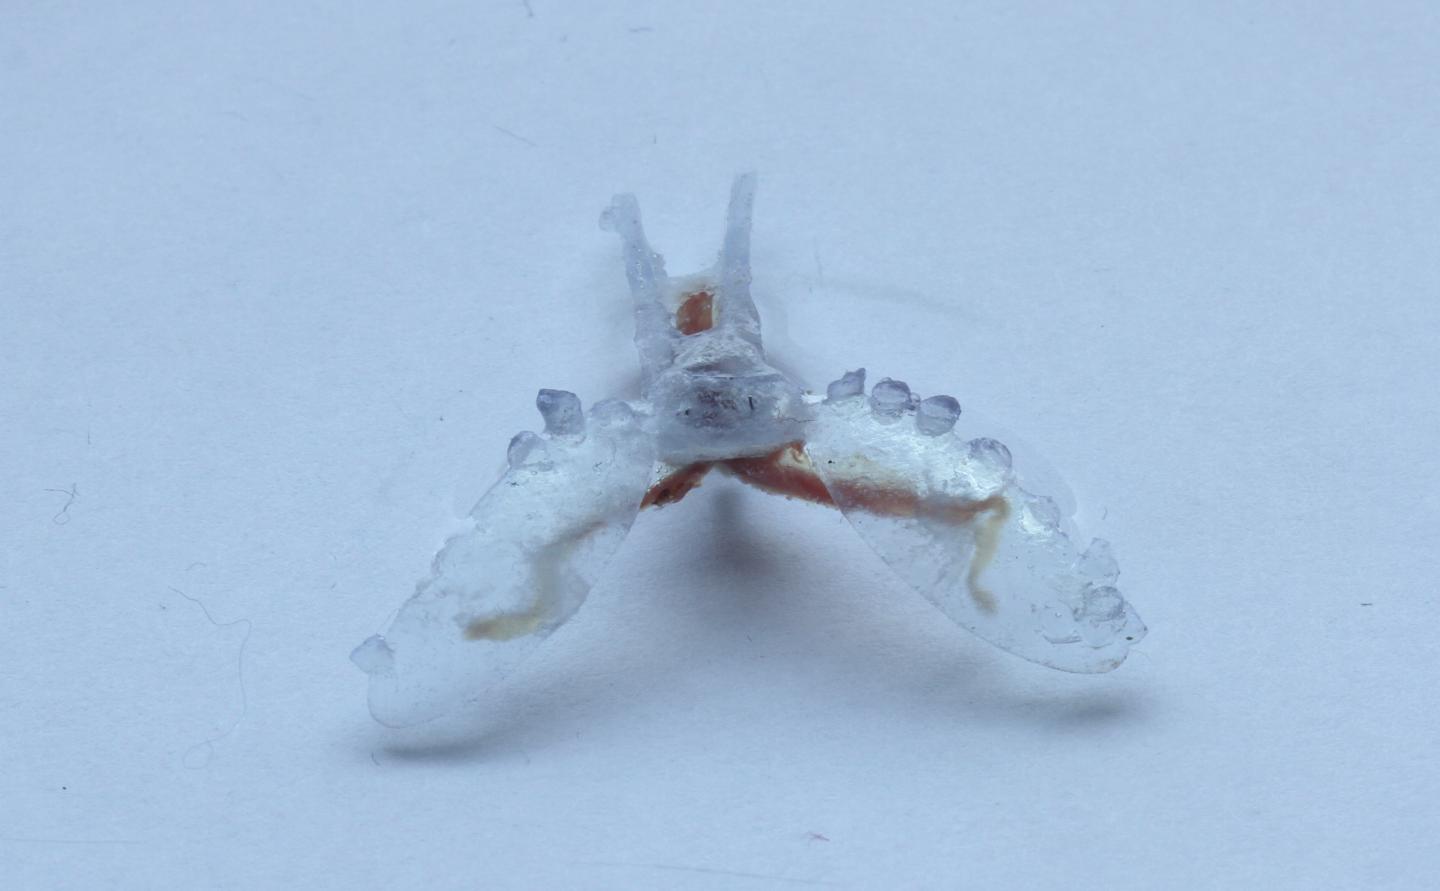 A sea slug’s buccal I2 muscle powers this biohybrid robot as it crawls like a sea turtle. The body and arms are made from a 3-D printed polymer. Credit: Victoria Webster